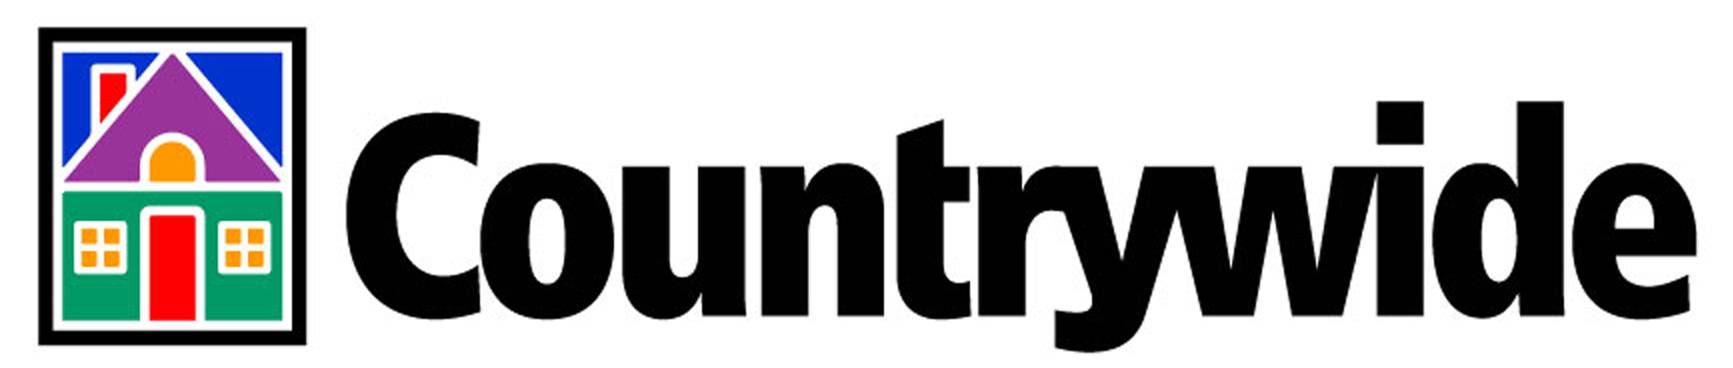 COUNTRYWIDE Brand Logo